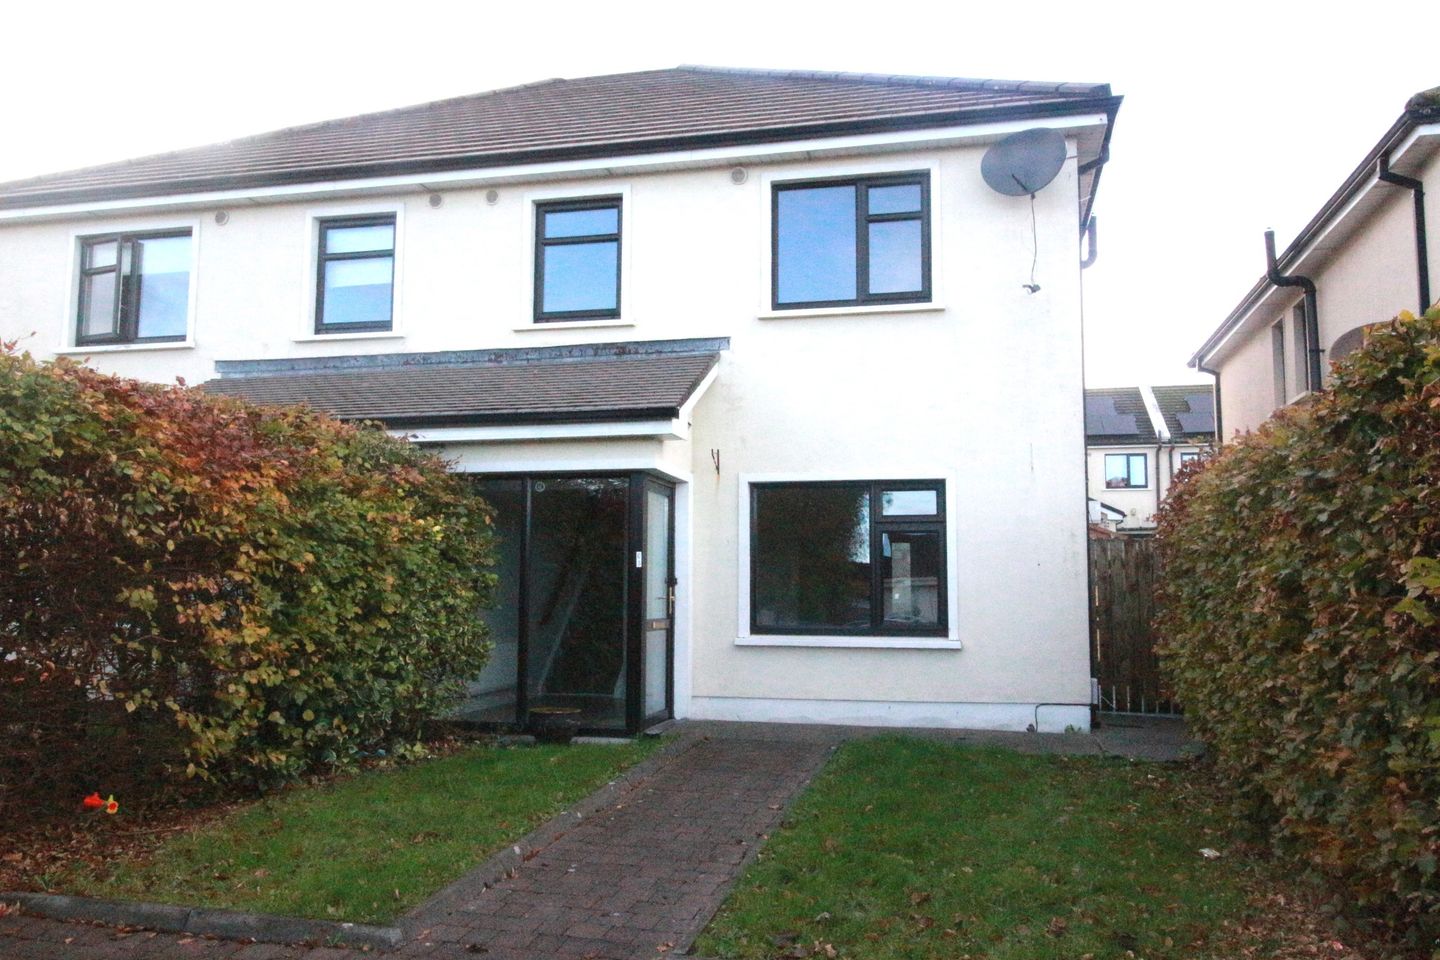 103 Country Meadows, Cloontooa, Tuam, Co. Galway, H54AY18